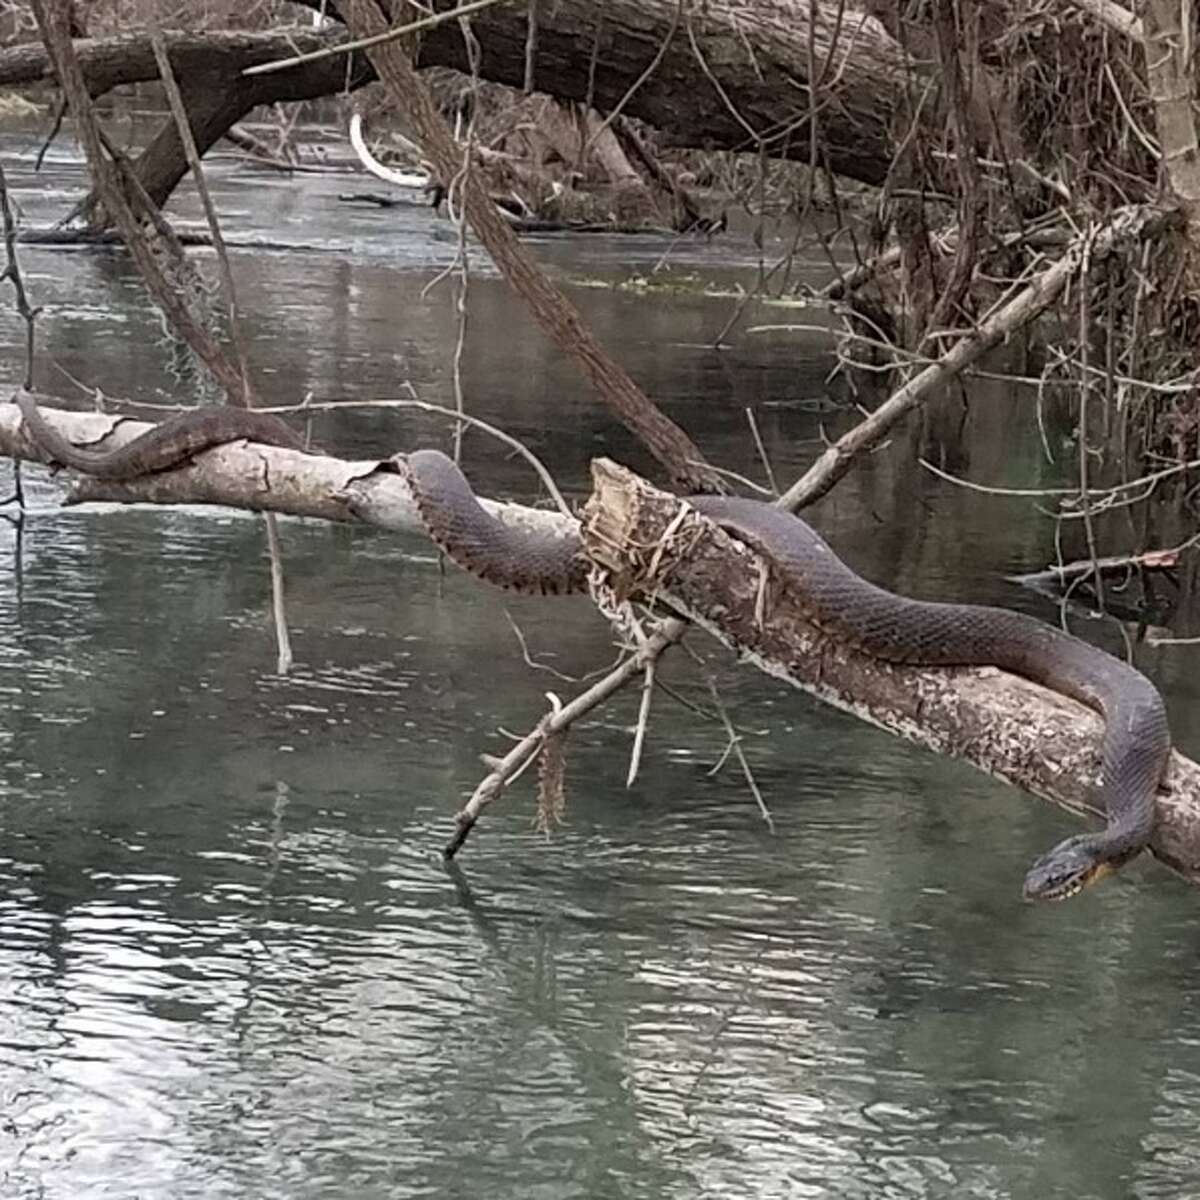 Texas fisherman shares surprise encounter with 4-foot-long river snake pic